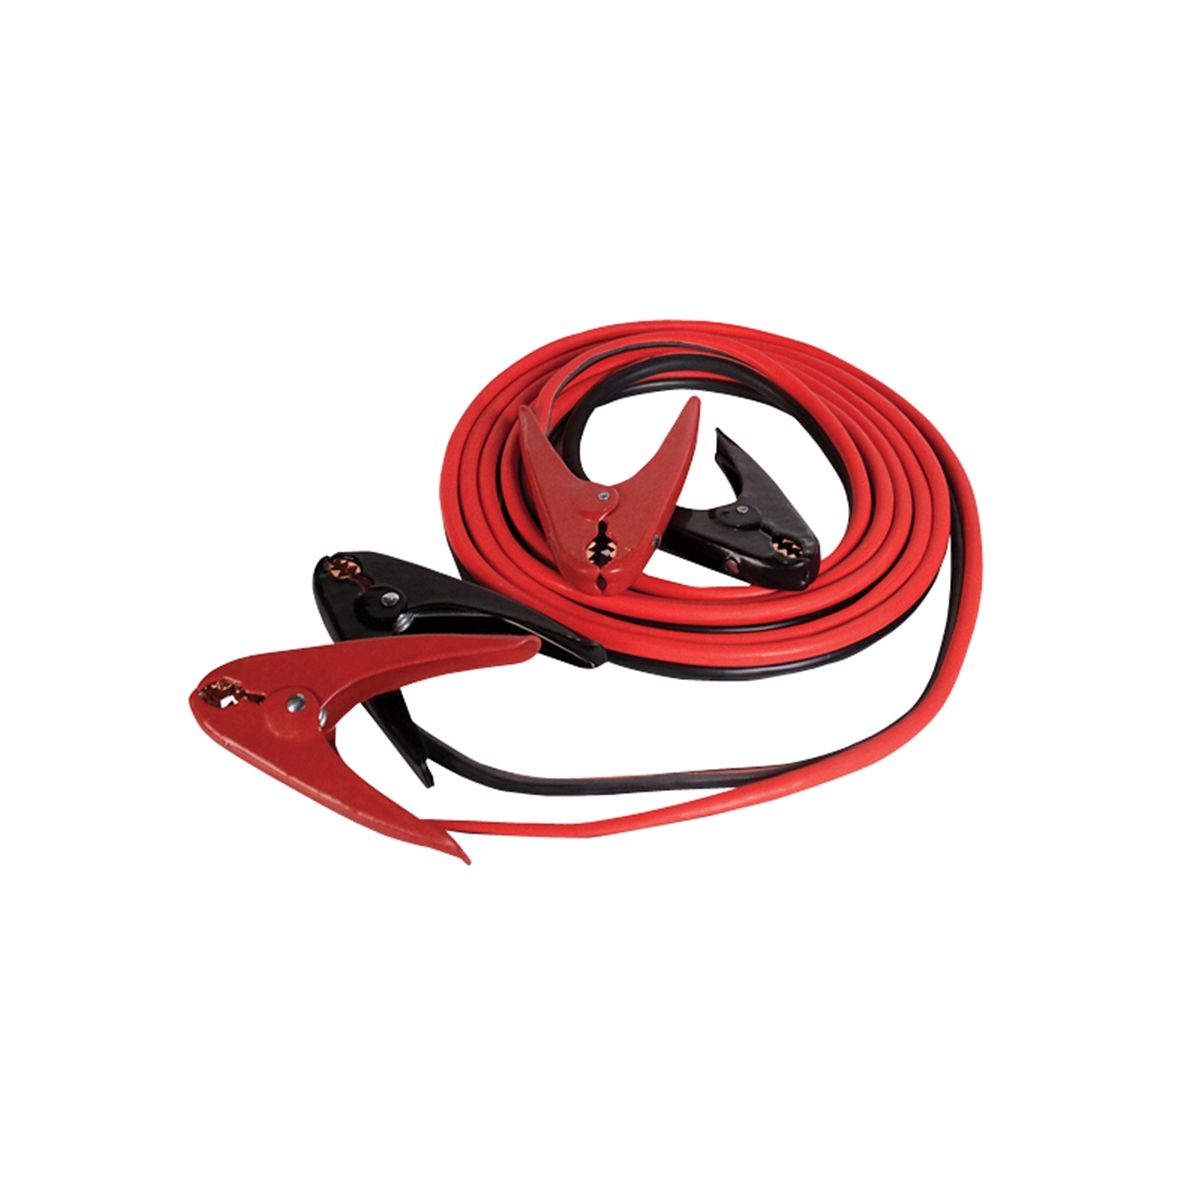 4 Gauge 20 Ft 600 Amp Parrot Clamp Booster Cables